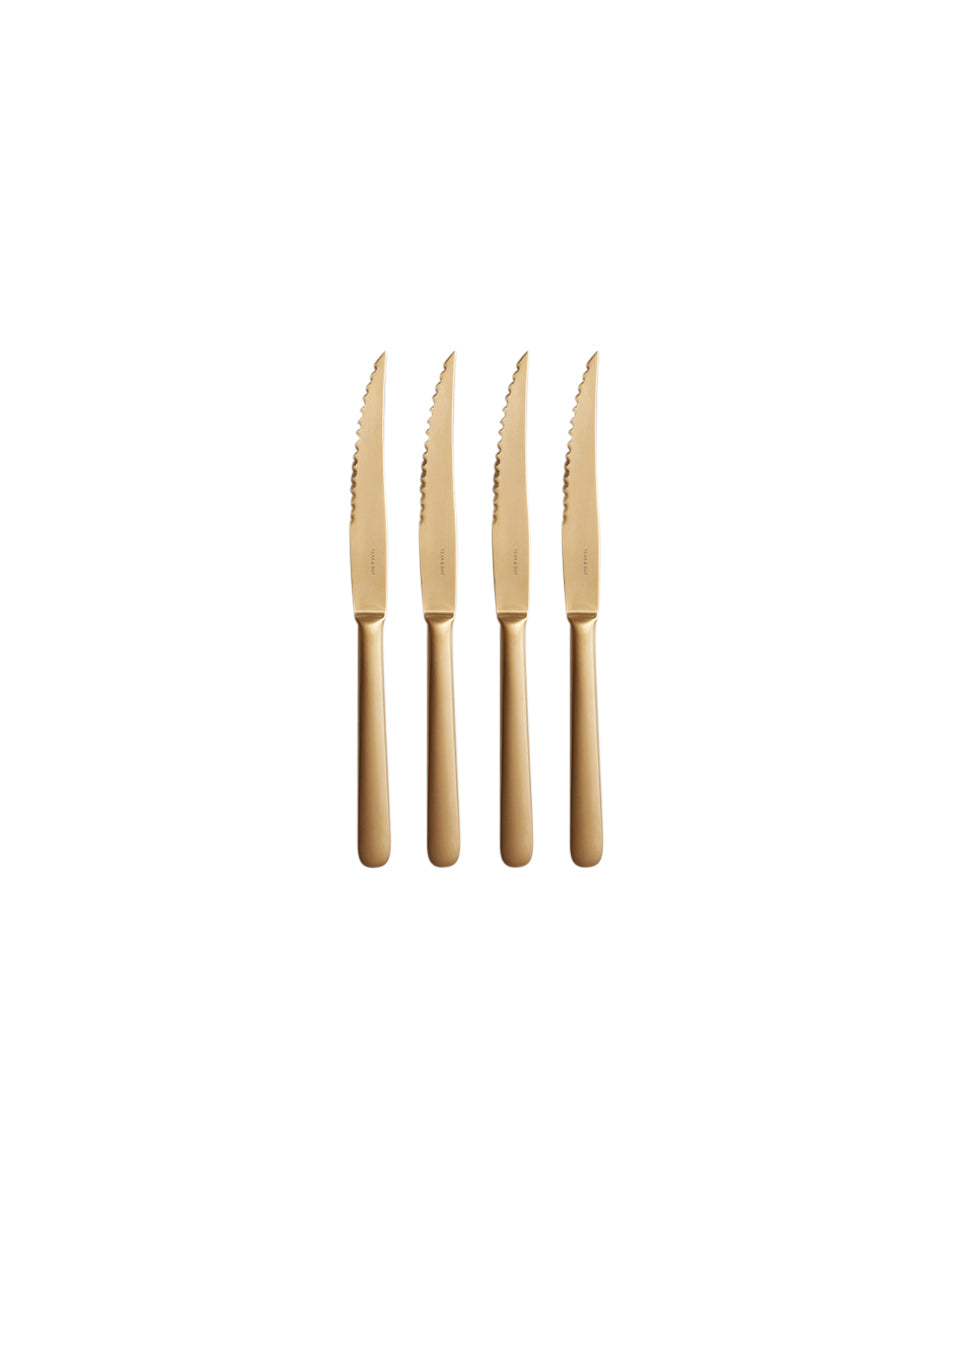 Year & Day Steak Knives, Set of 4